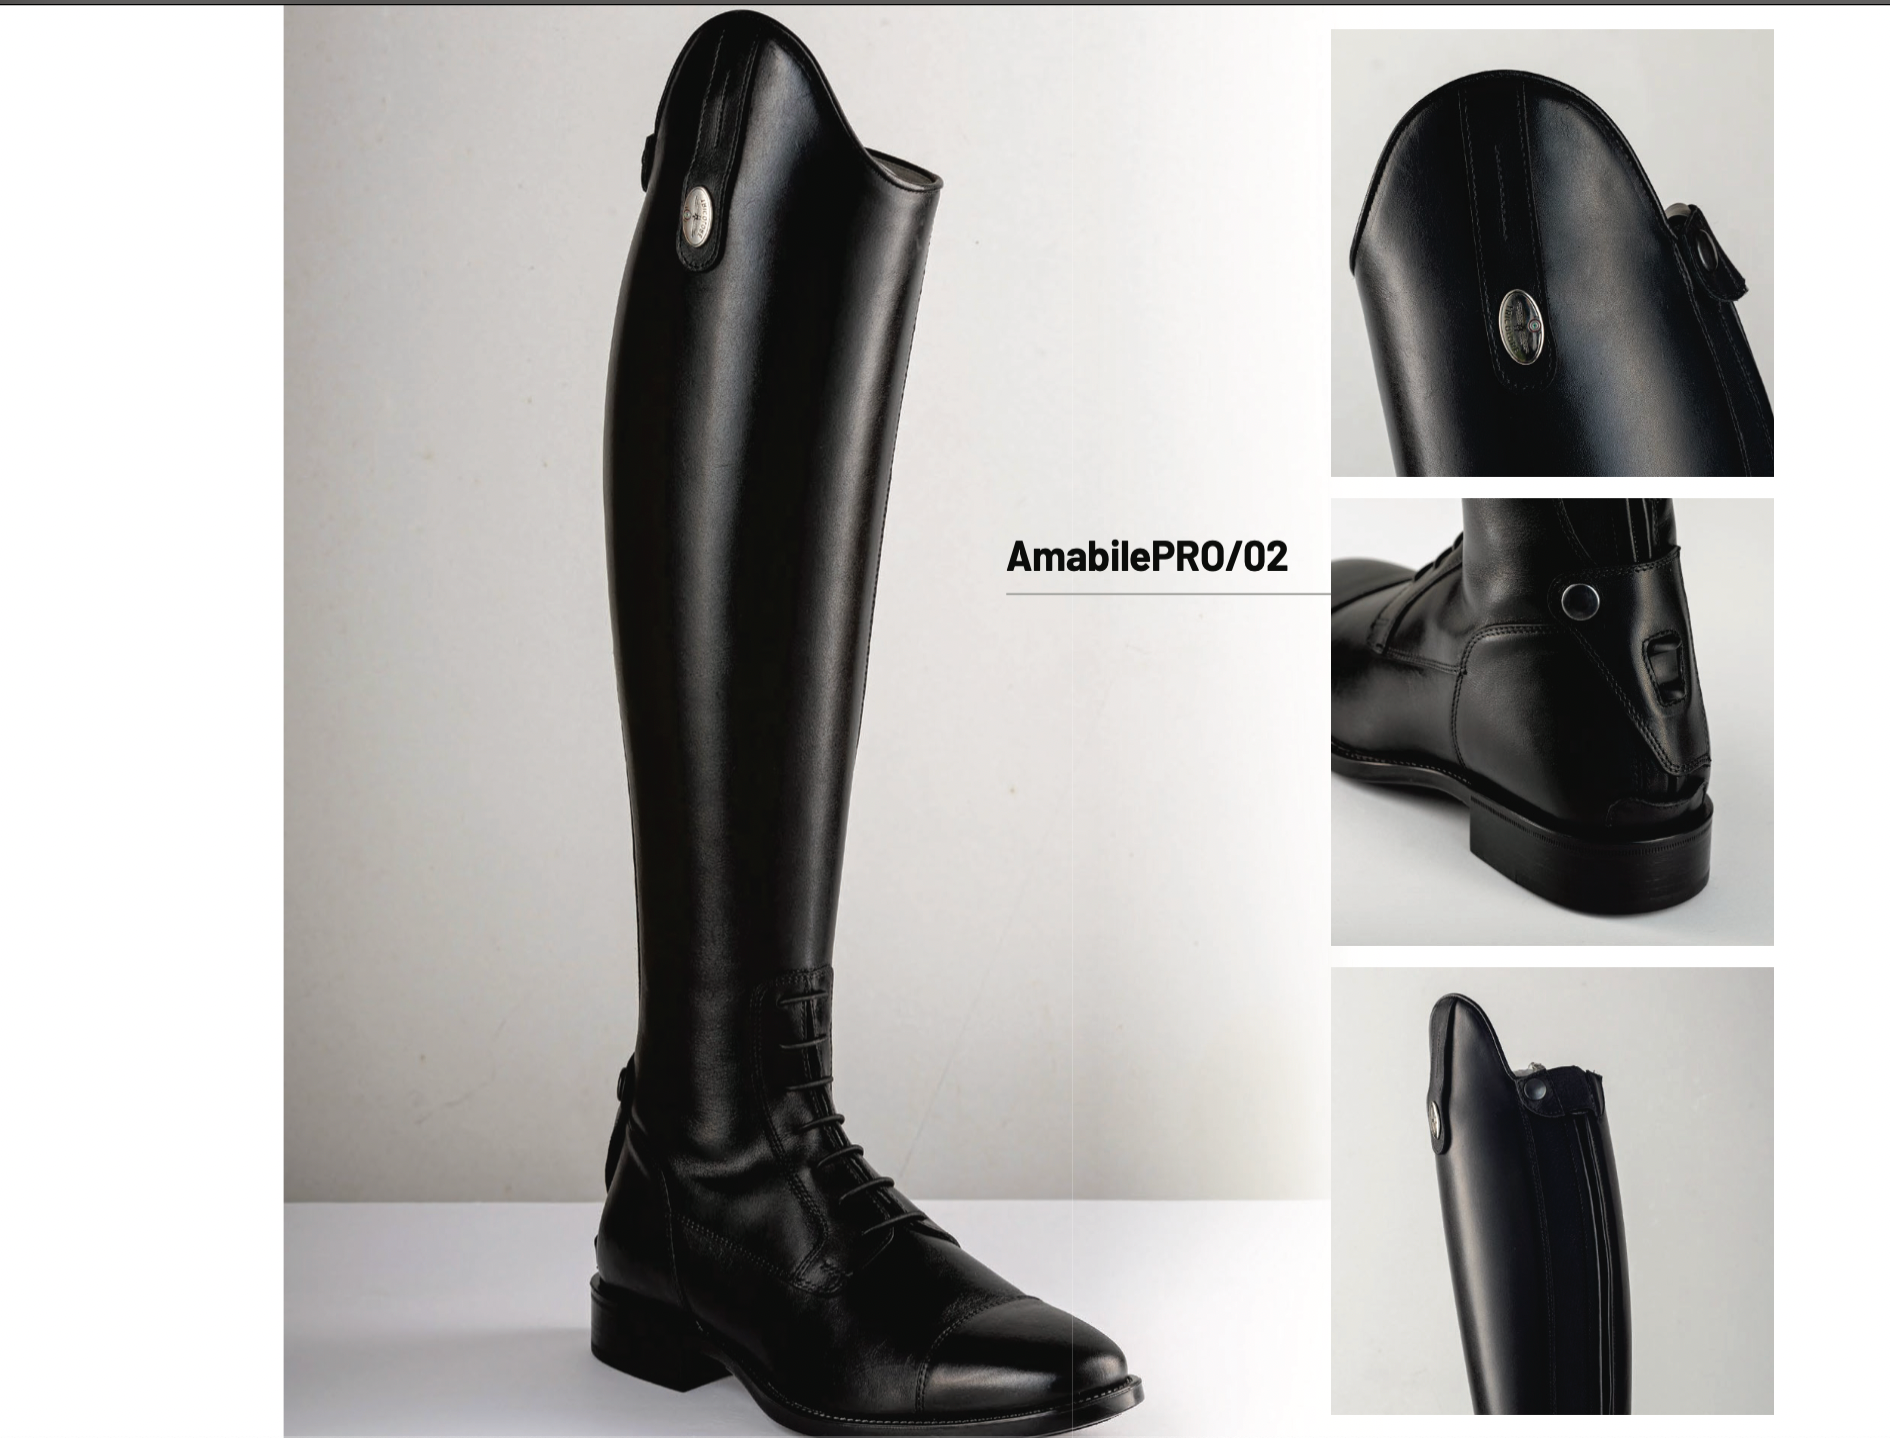 Tricolore smooth Dress or field  PRO Tall boot (in stock)